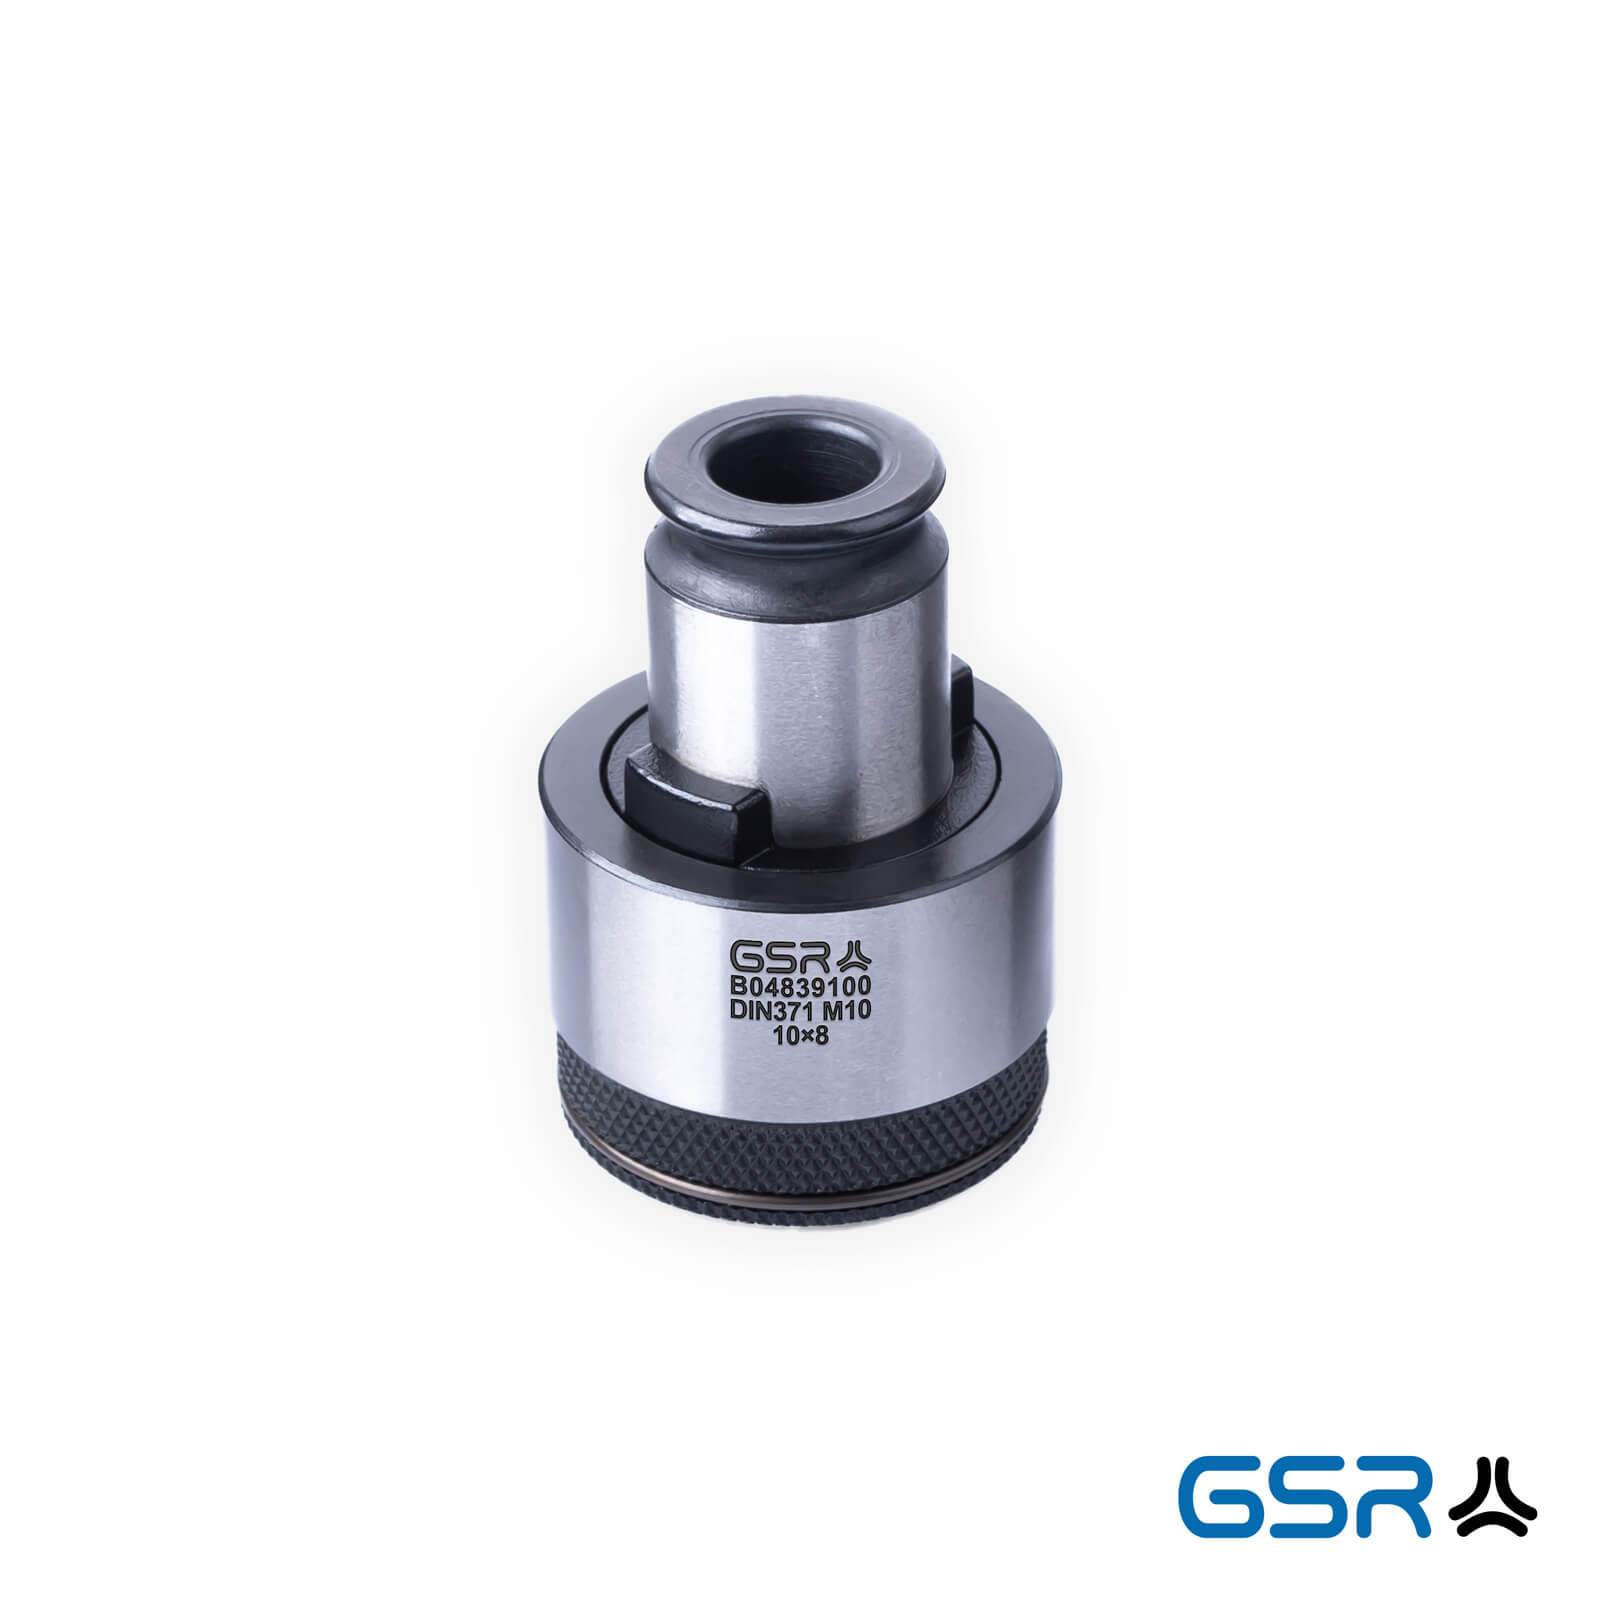 GSR thread-cutting quick-change-inserts e-Tapping DIN352 DIN371 DIN376 04839100